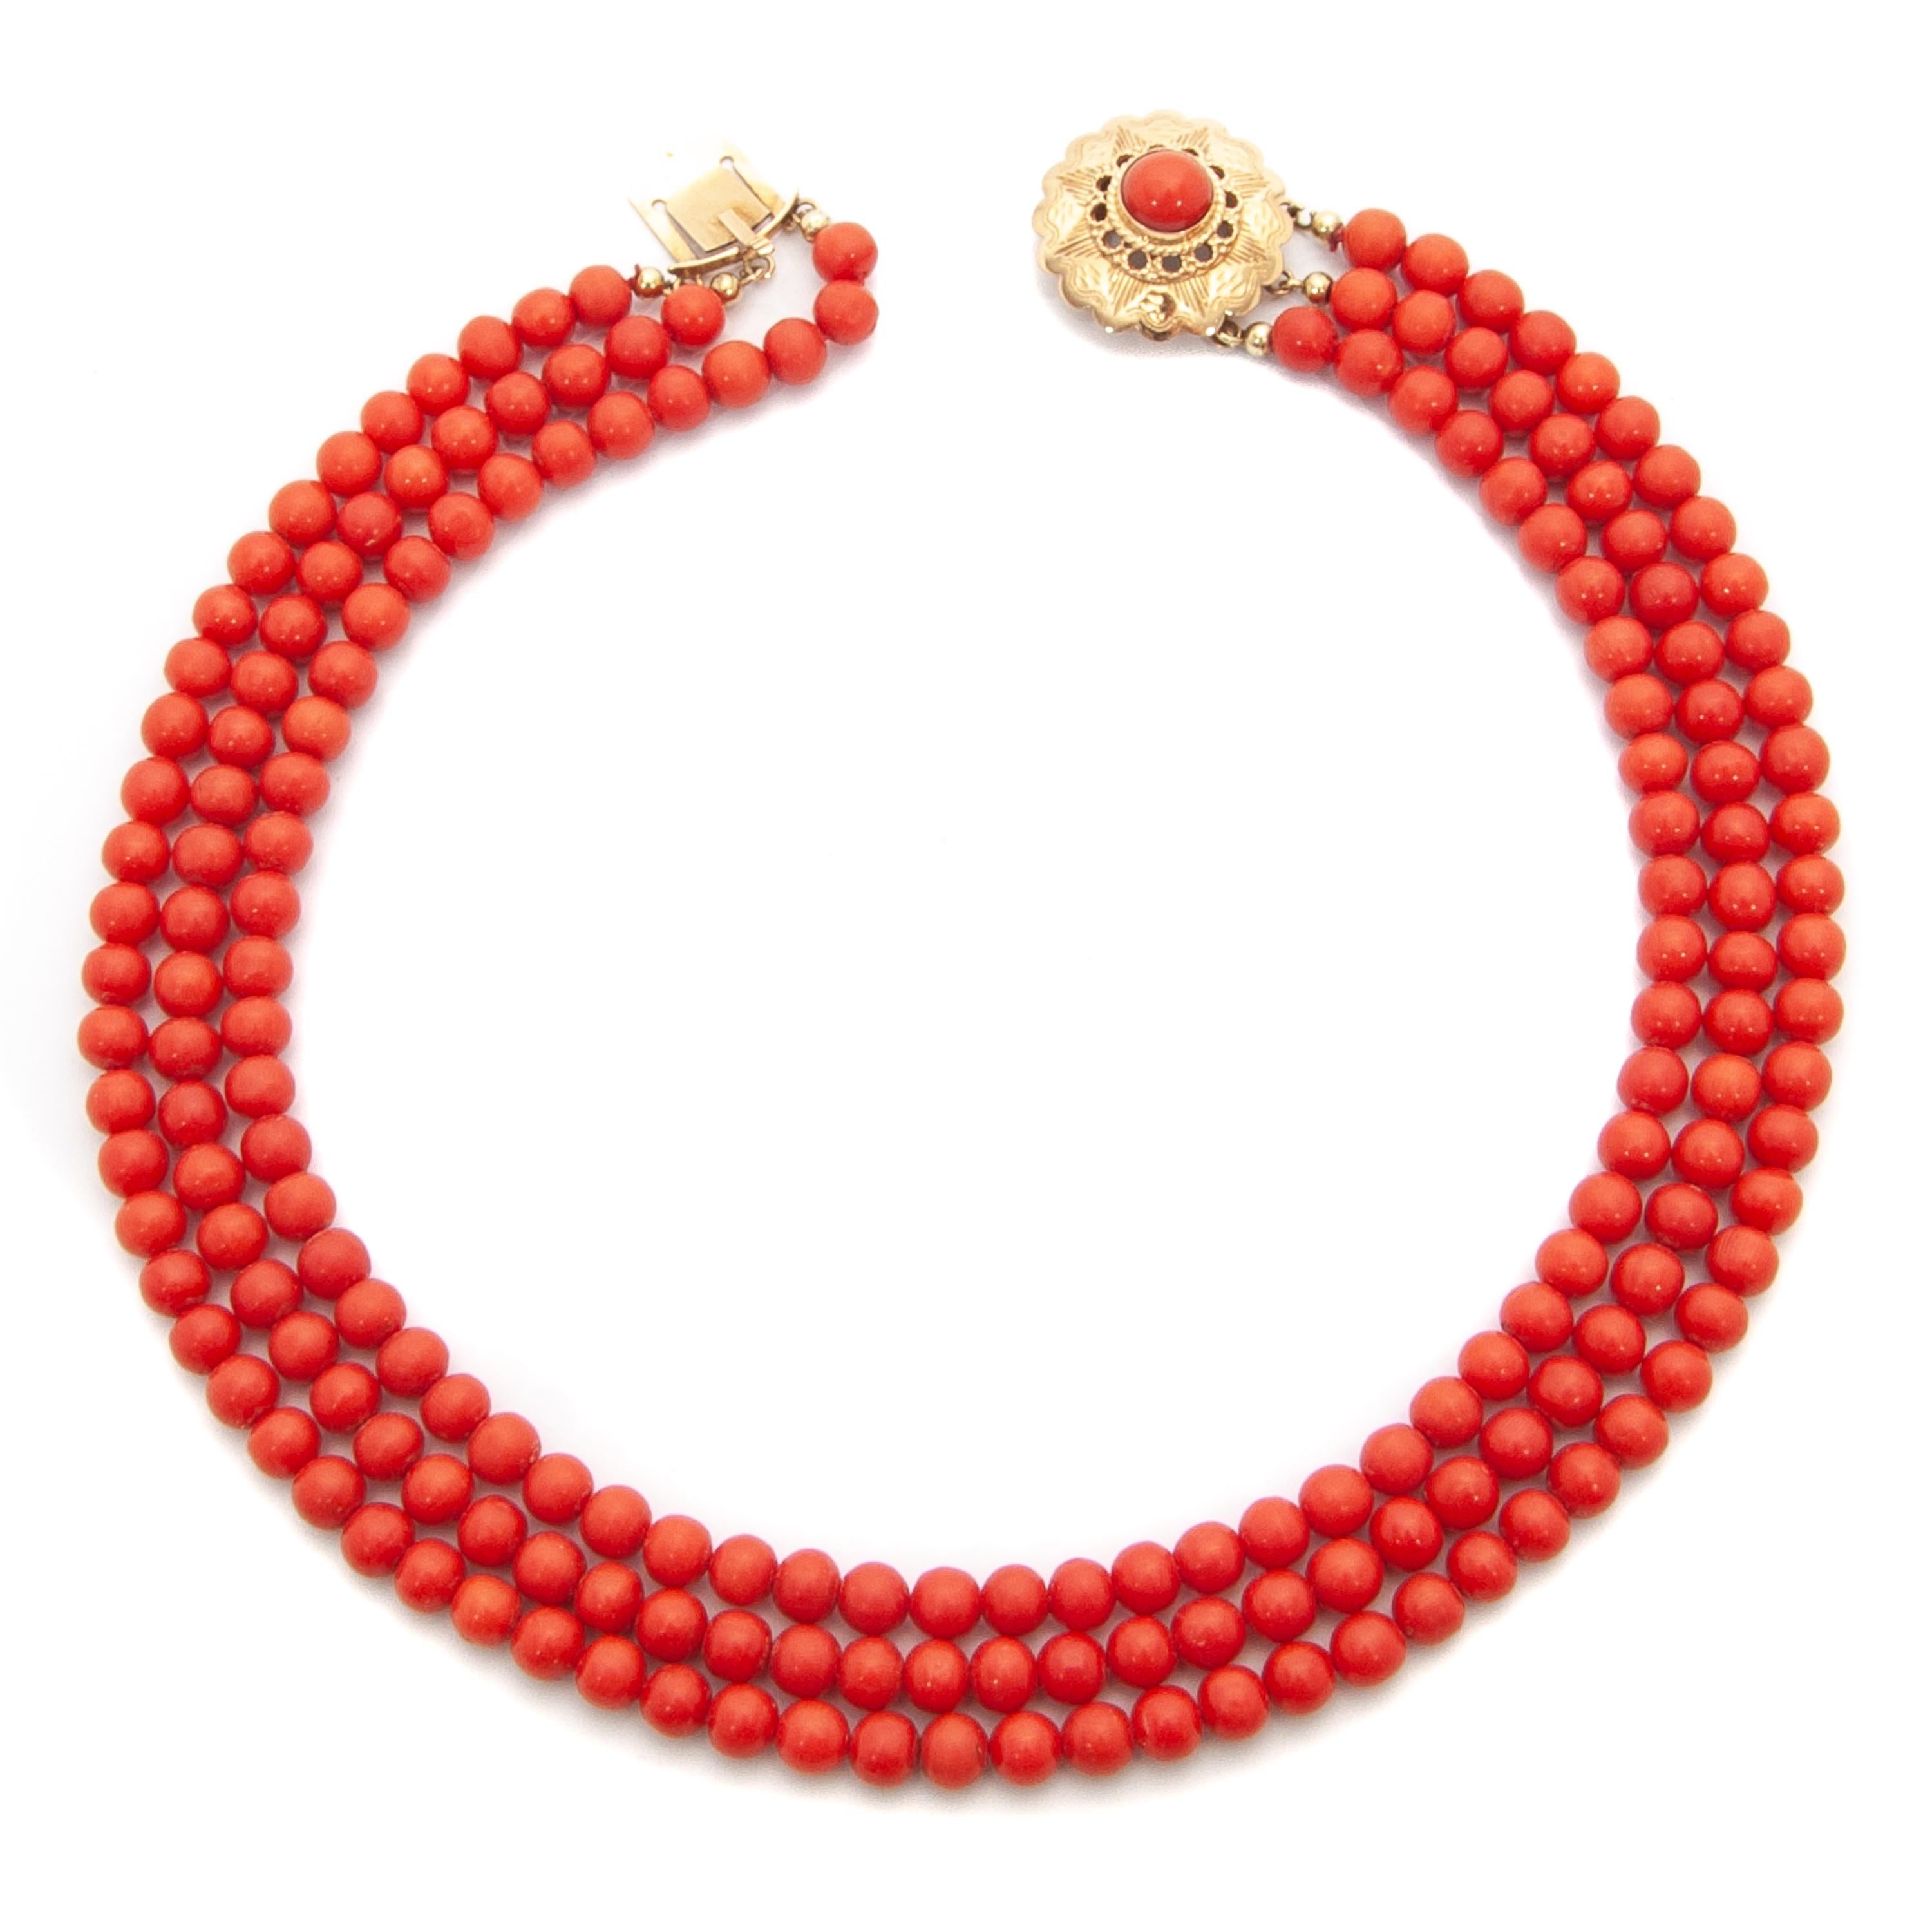 Women's 14 Karat Rose Gold Multi-Strand Red Coral Beaded Necklace